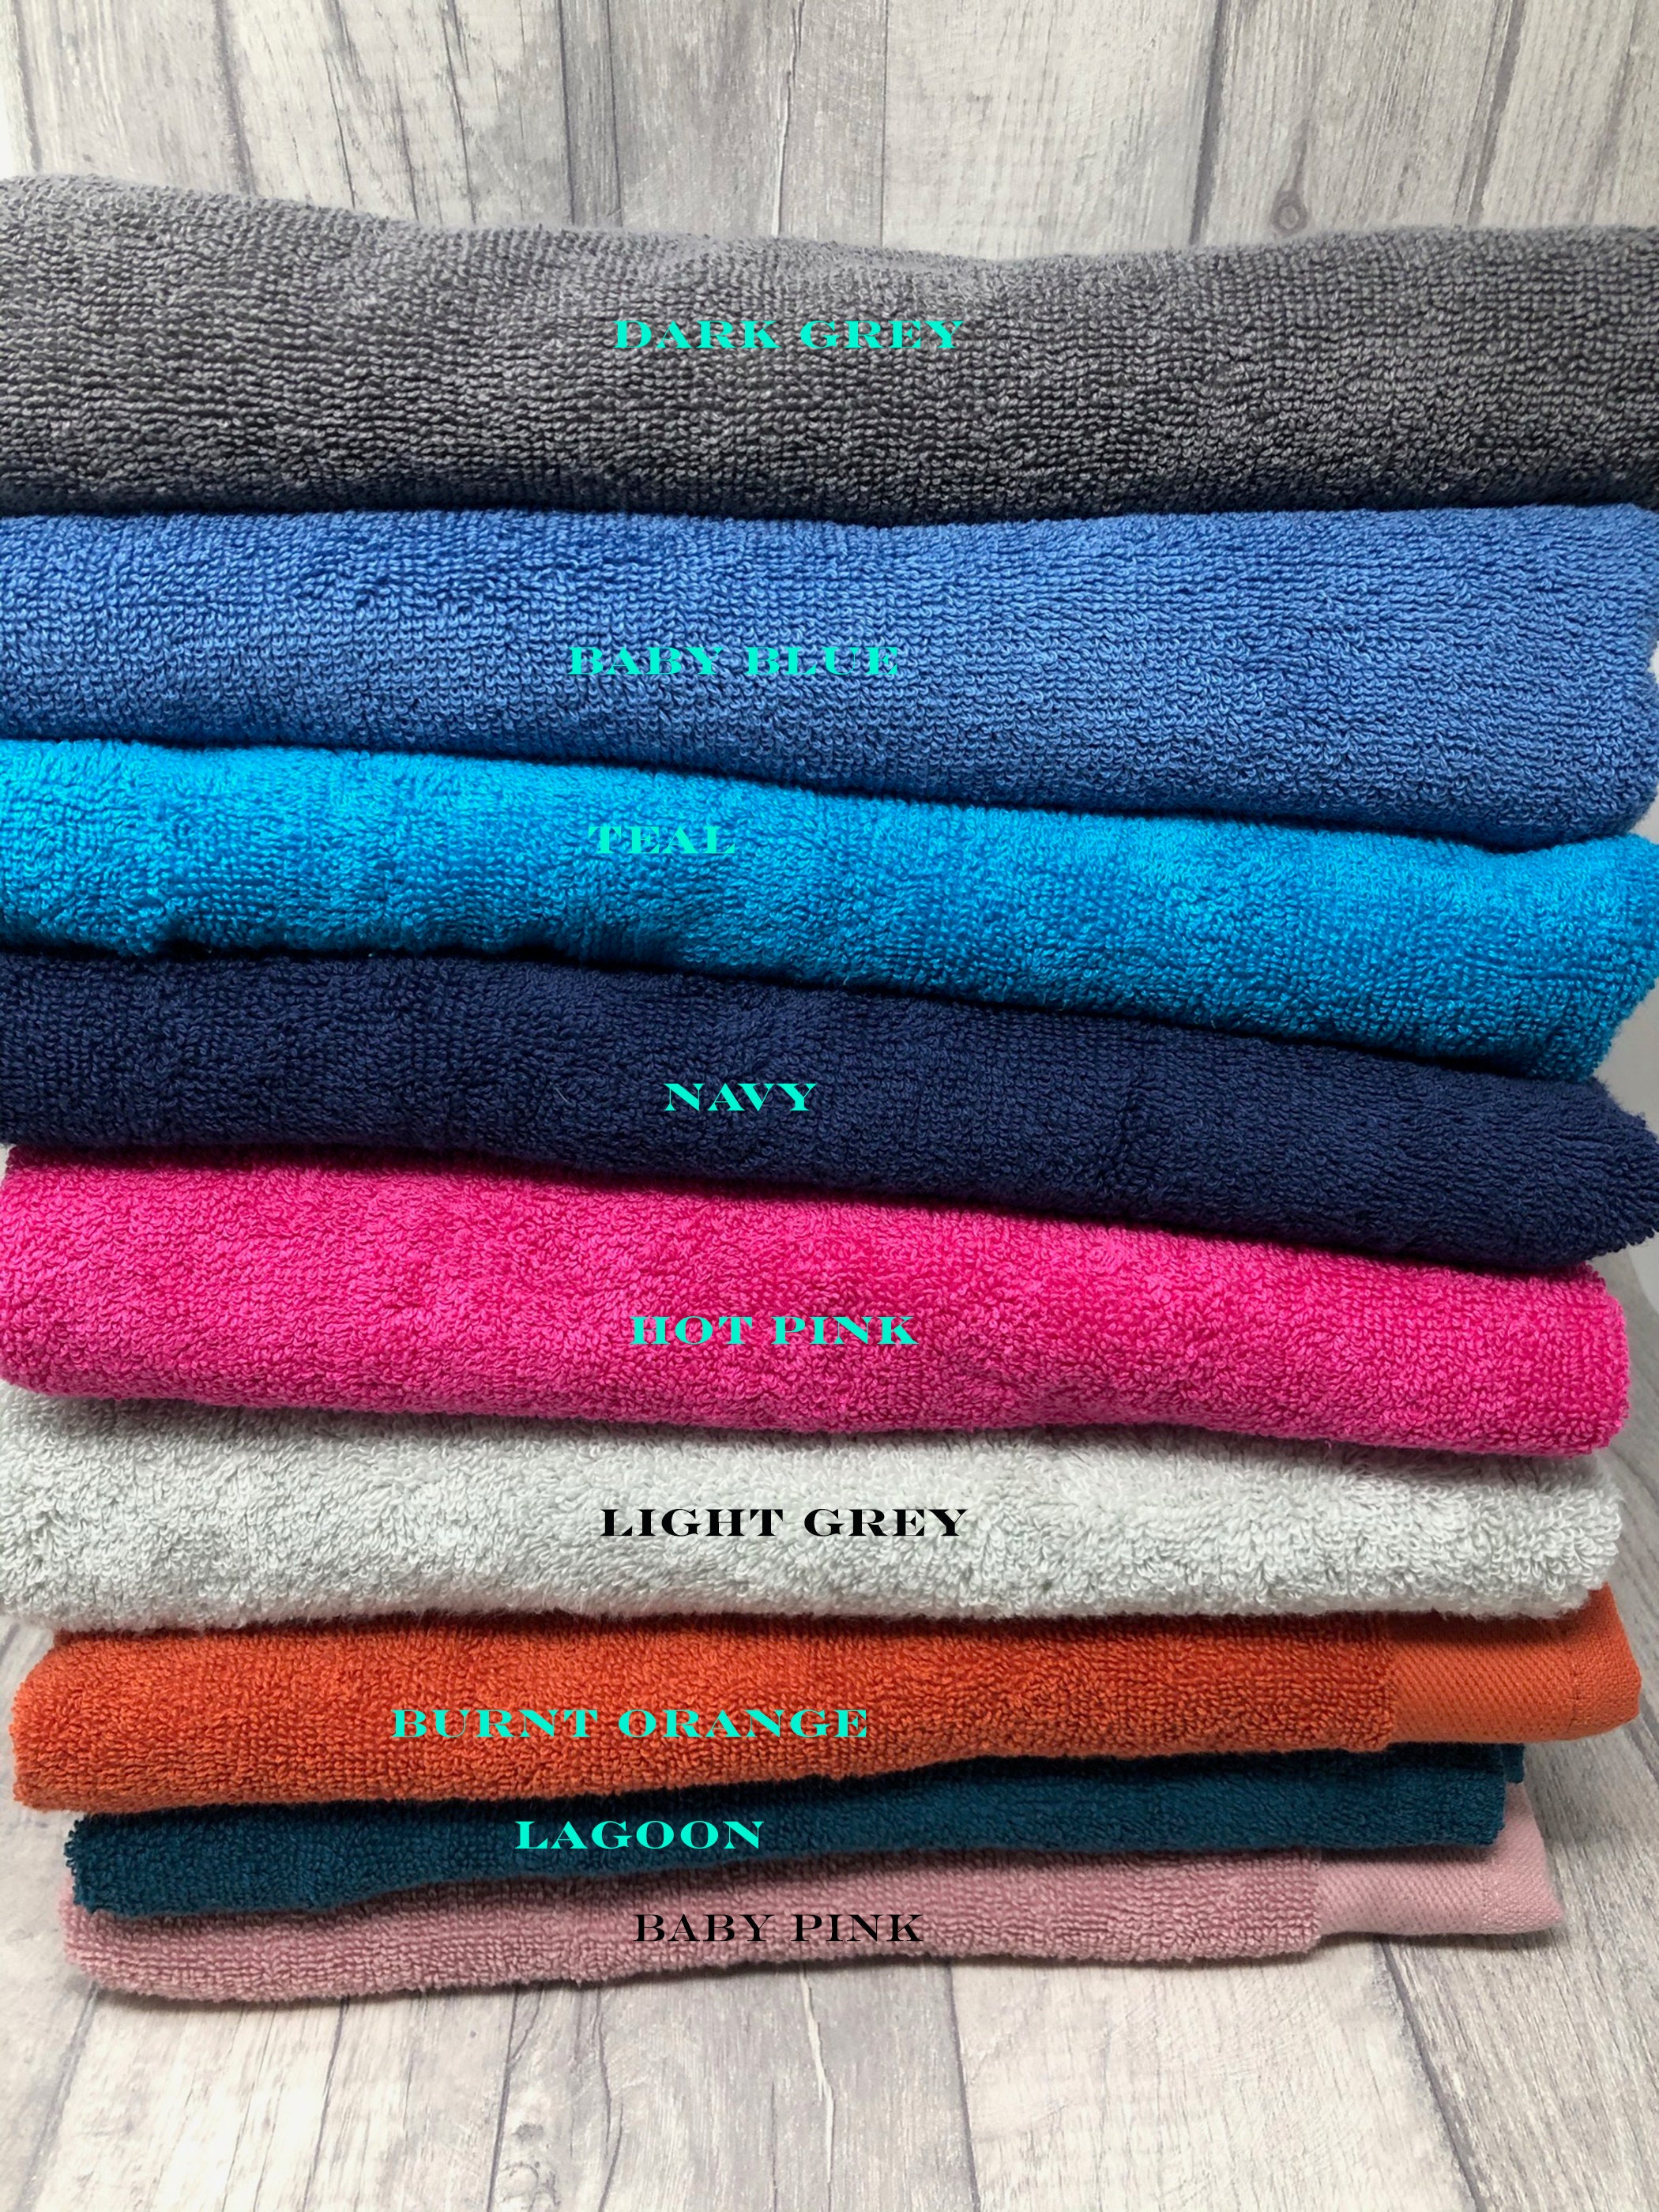 Personalised Hot Tub Towel, Embroidered Hot Tub Design, Custom Name Towel,  Pool Party Towel, Hot Tub Towel With Name, Ideal for Gifts 